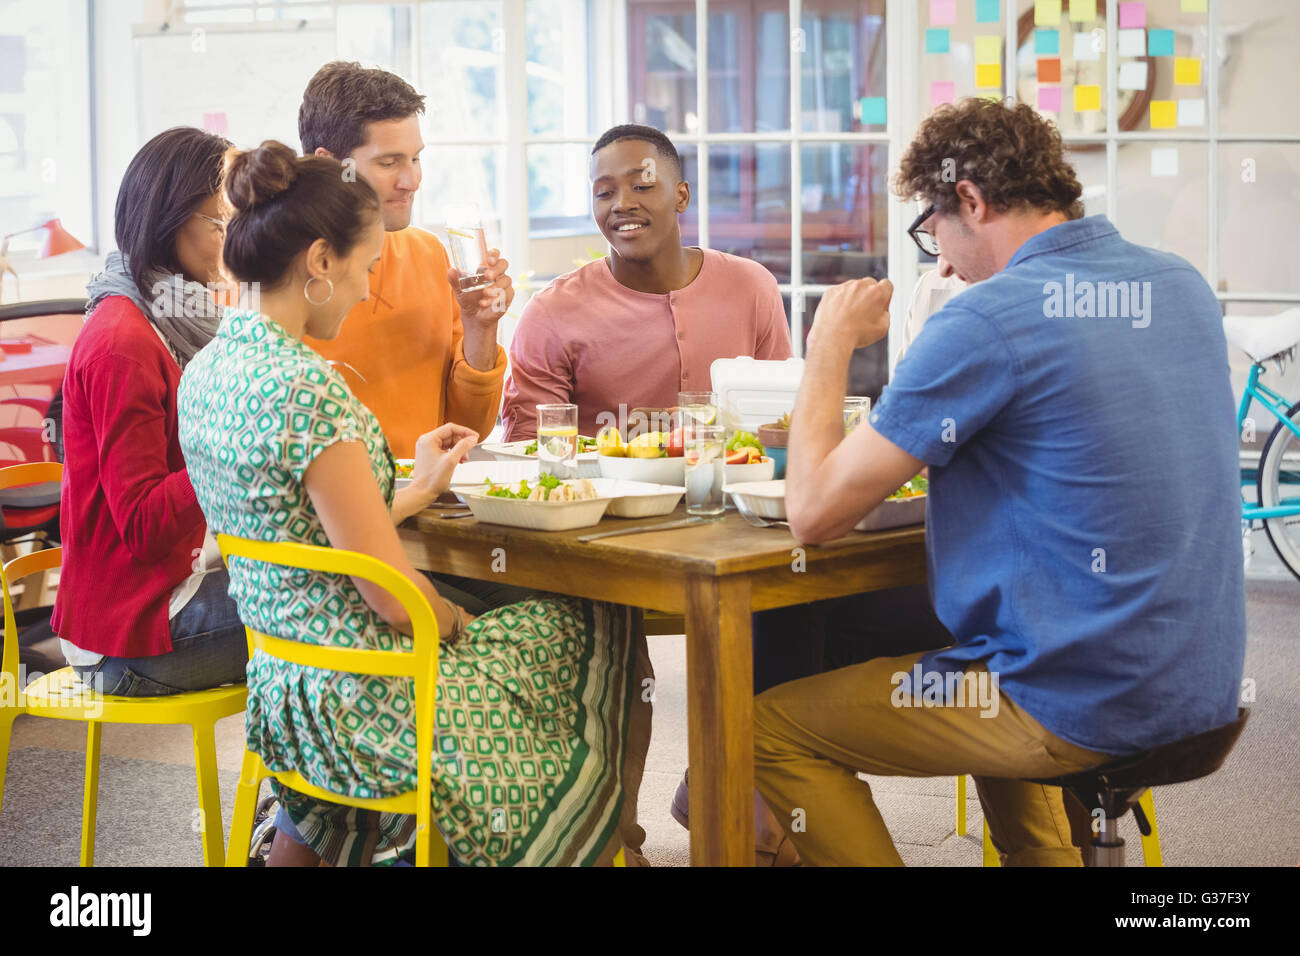 Business people eating together Stock Photo